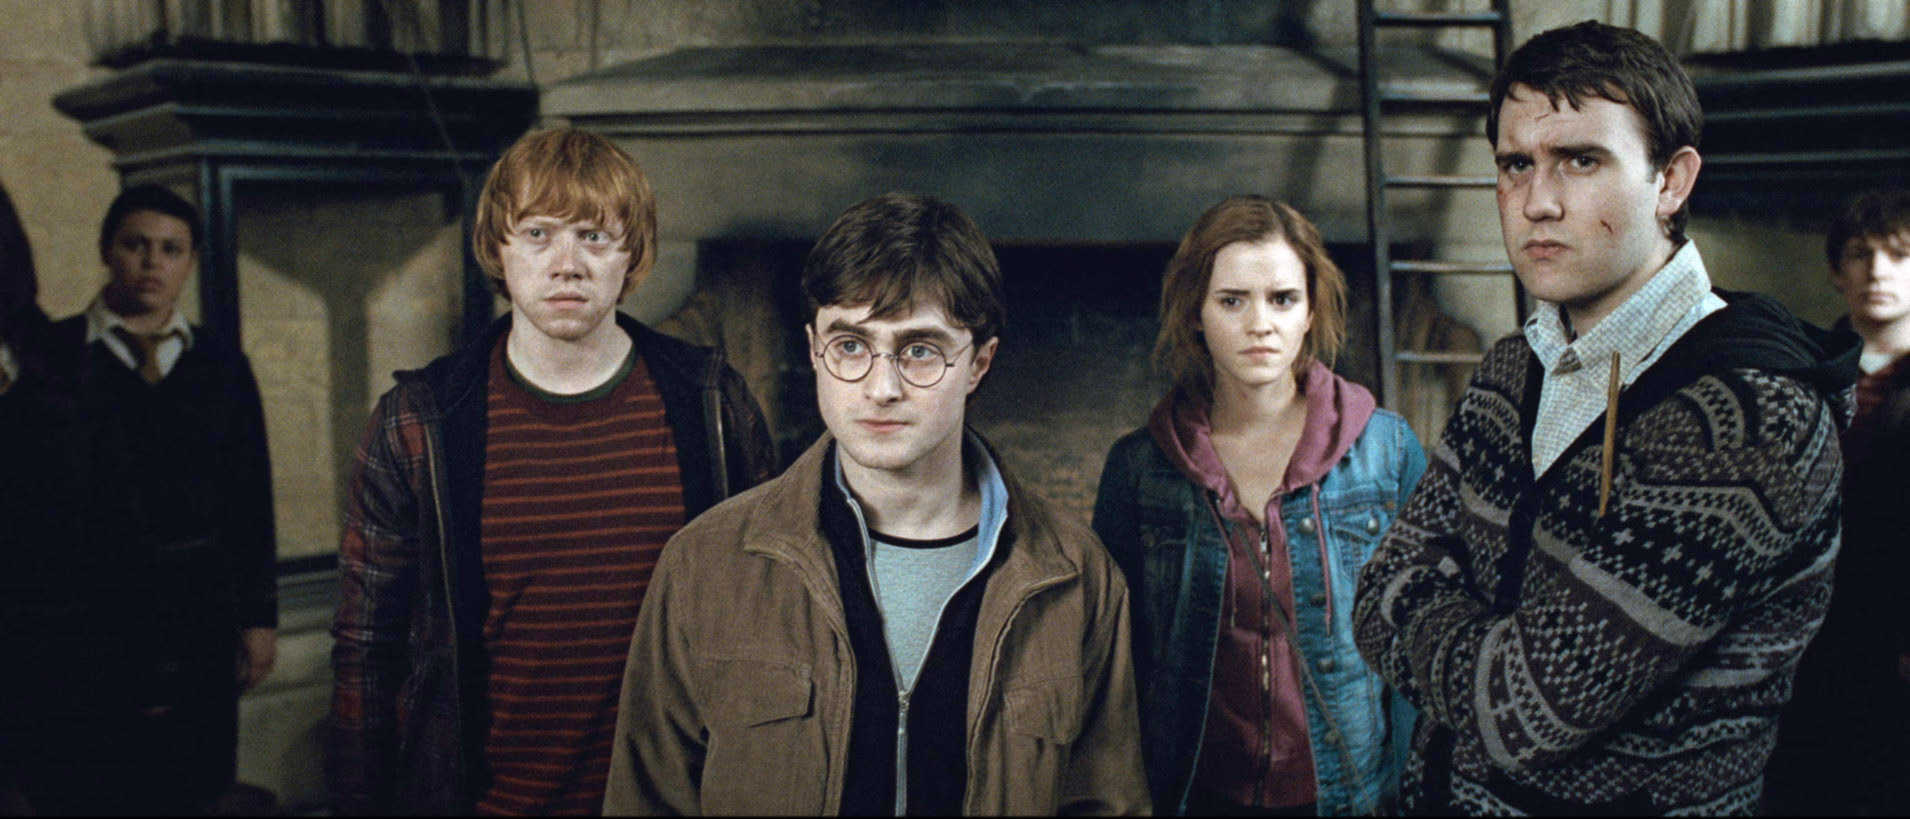 Harry standing Ron, Hermione, Neville, and other students in a scene from Harry Potter